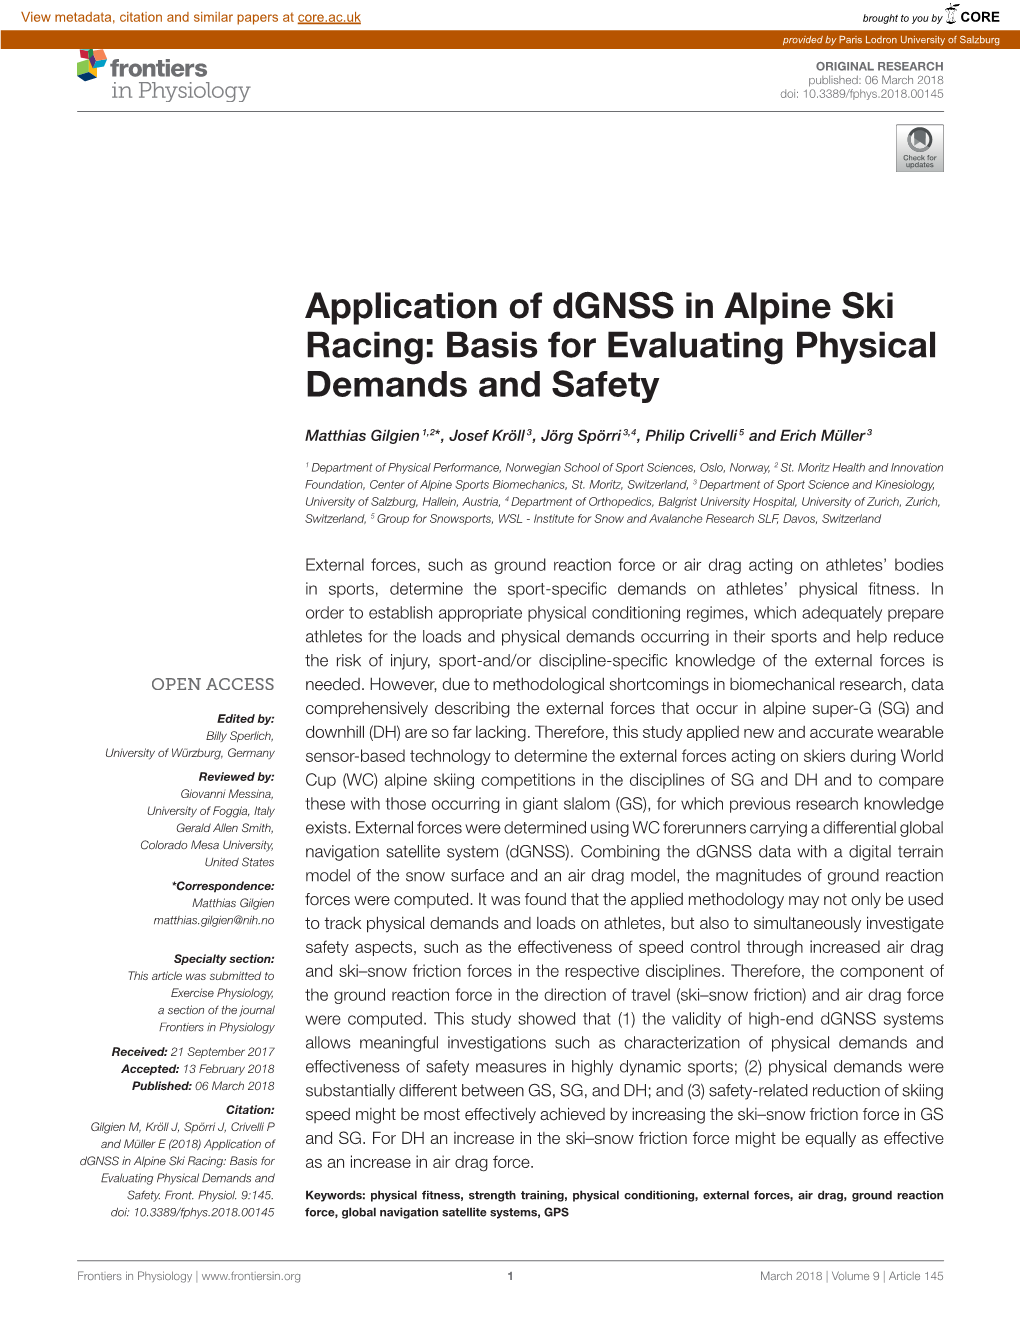 Application of Dgnss in Alpine Ski Racing: Basis for Evaluating Physical Demands and Safety